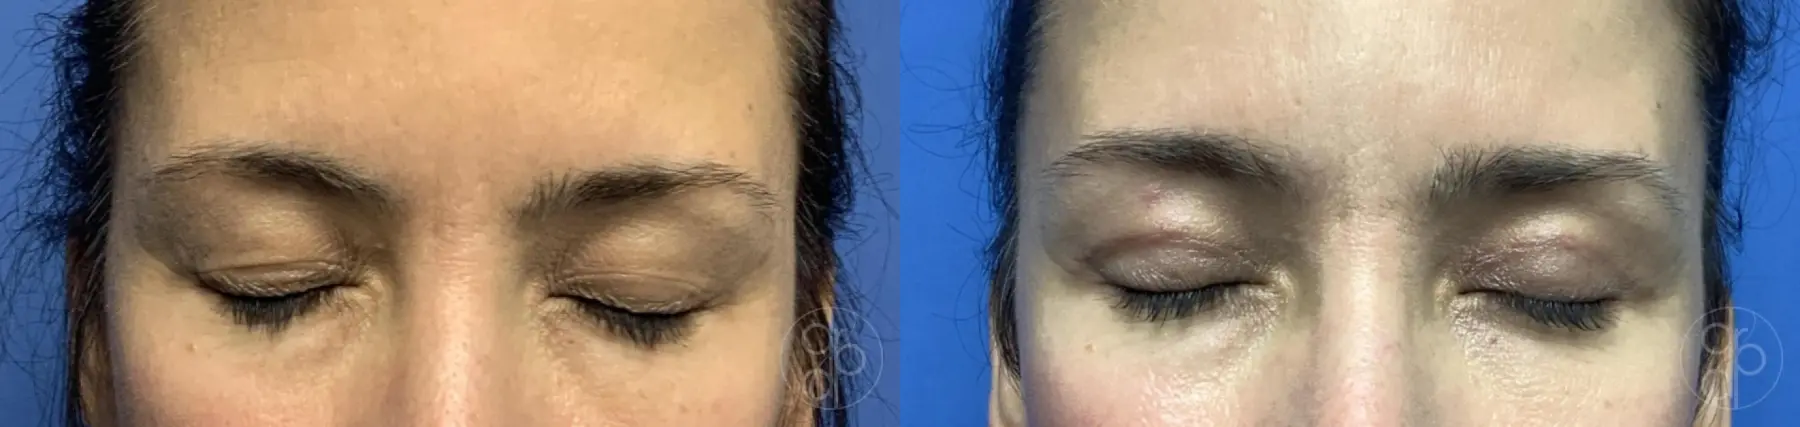 patient 12658 blepharoplasty before and after result - Before and After 1